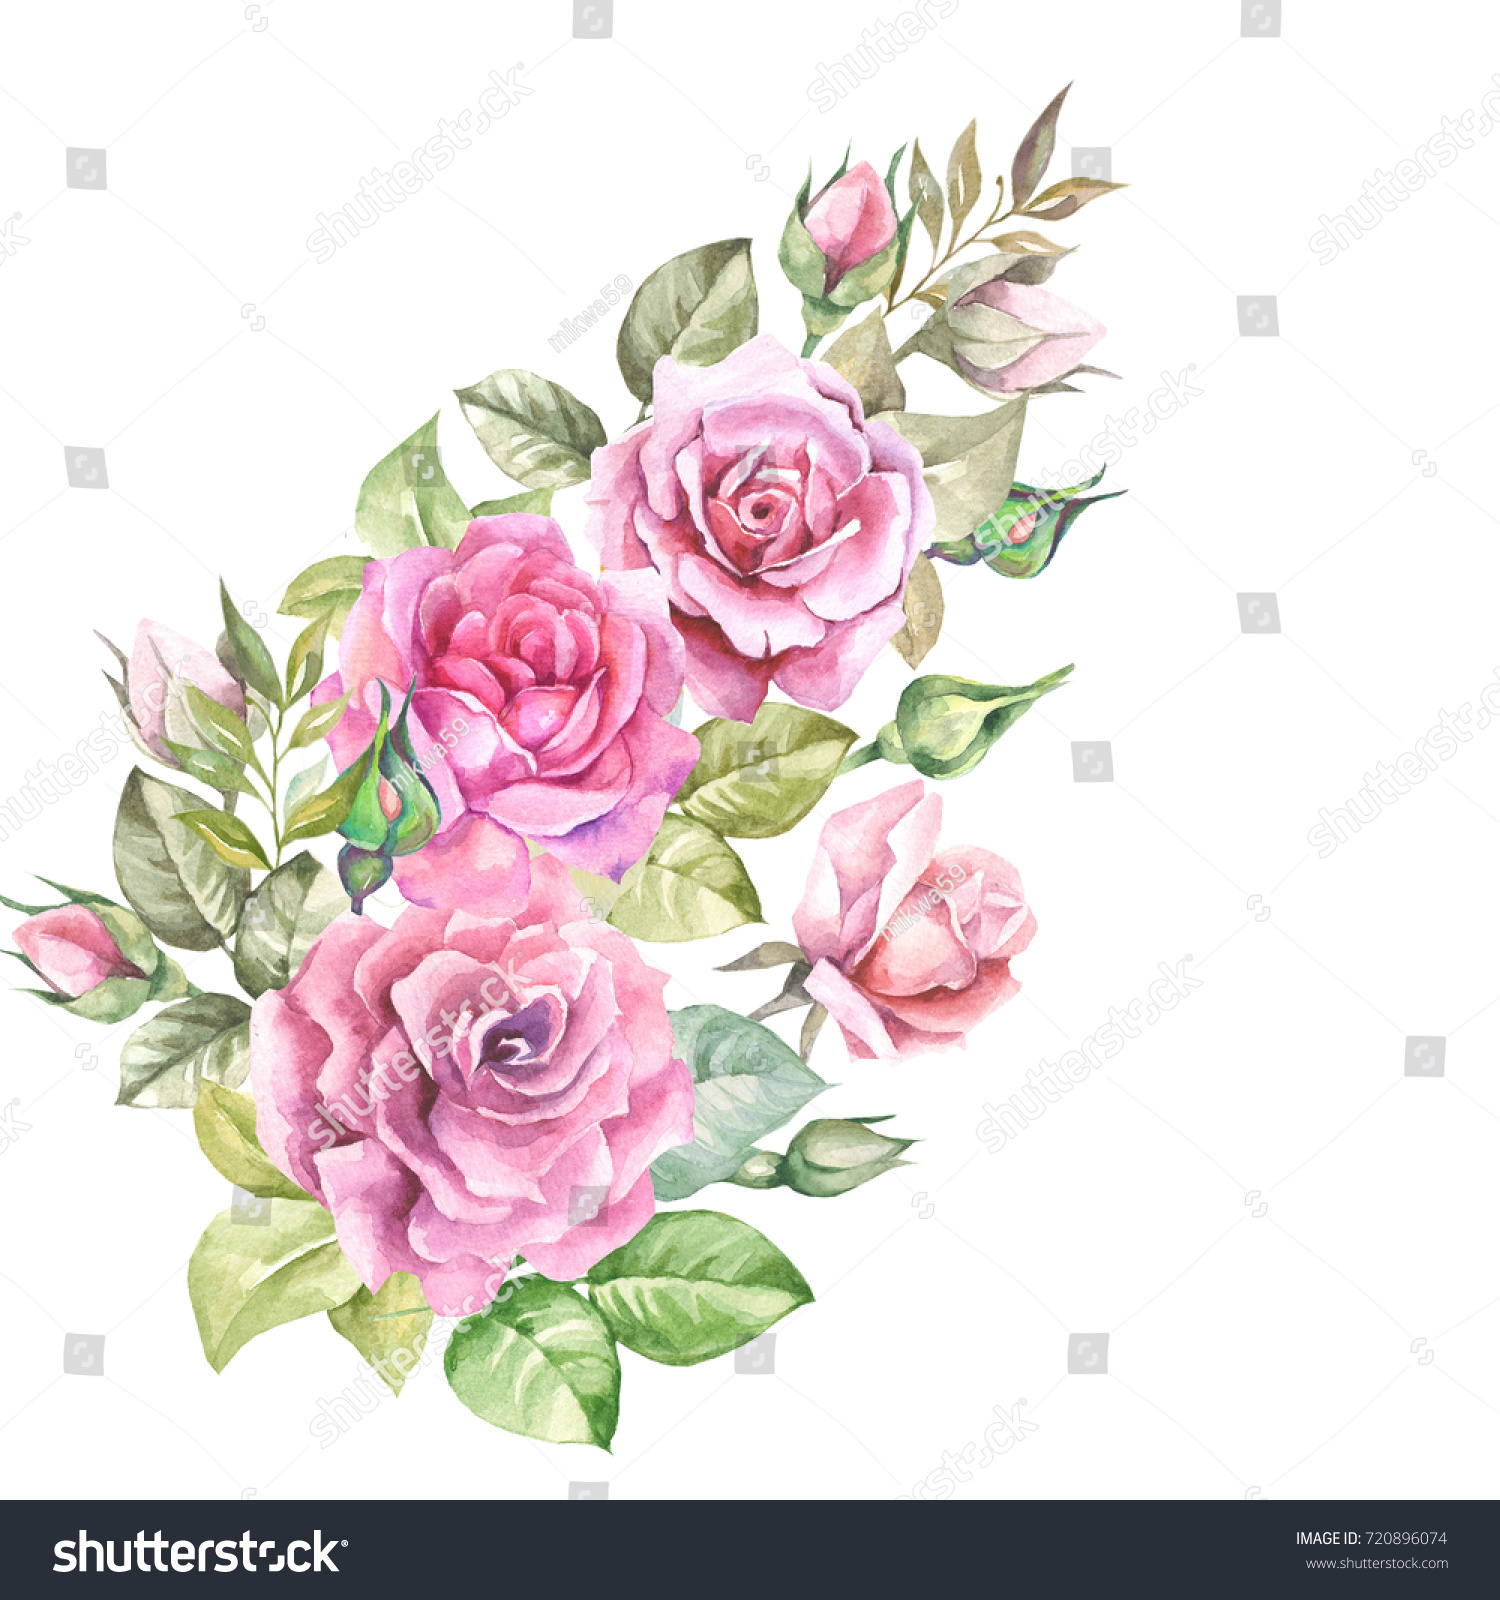 Flowers Composition Watercolor Roses Stock Illustration 720896074 ...